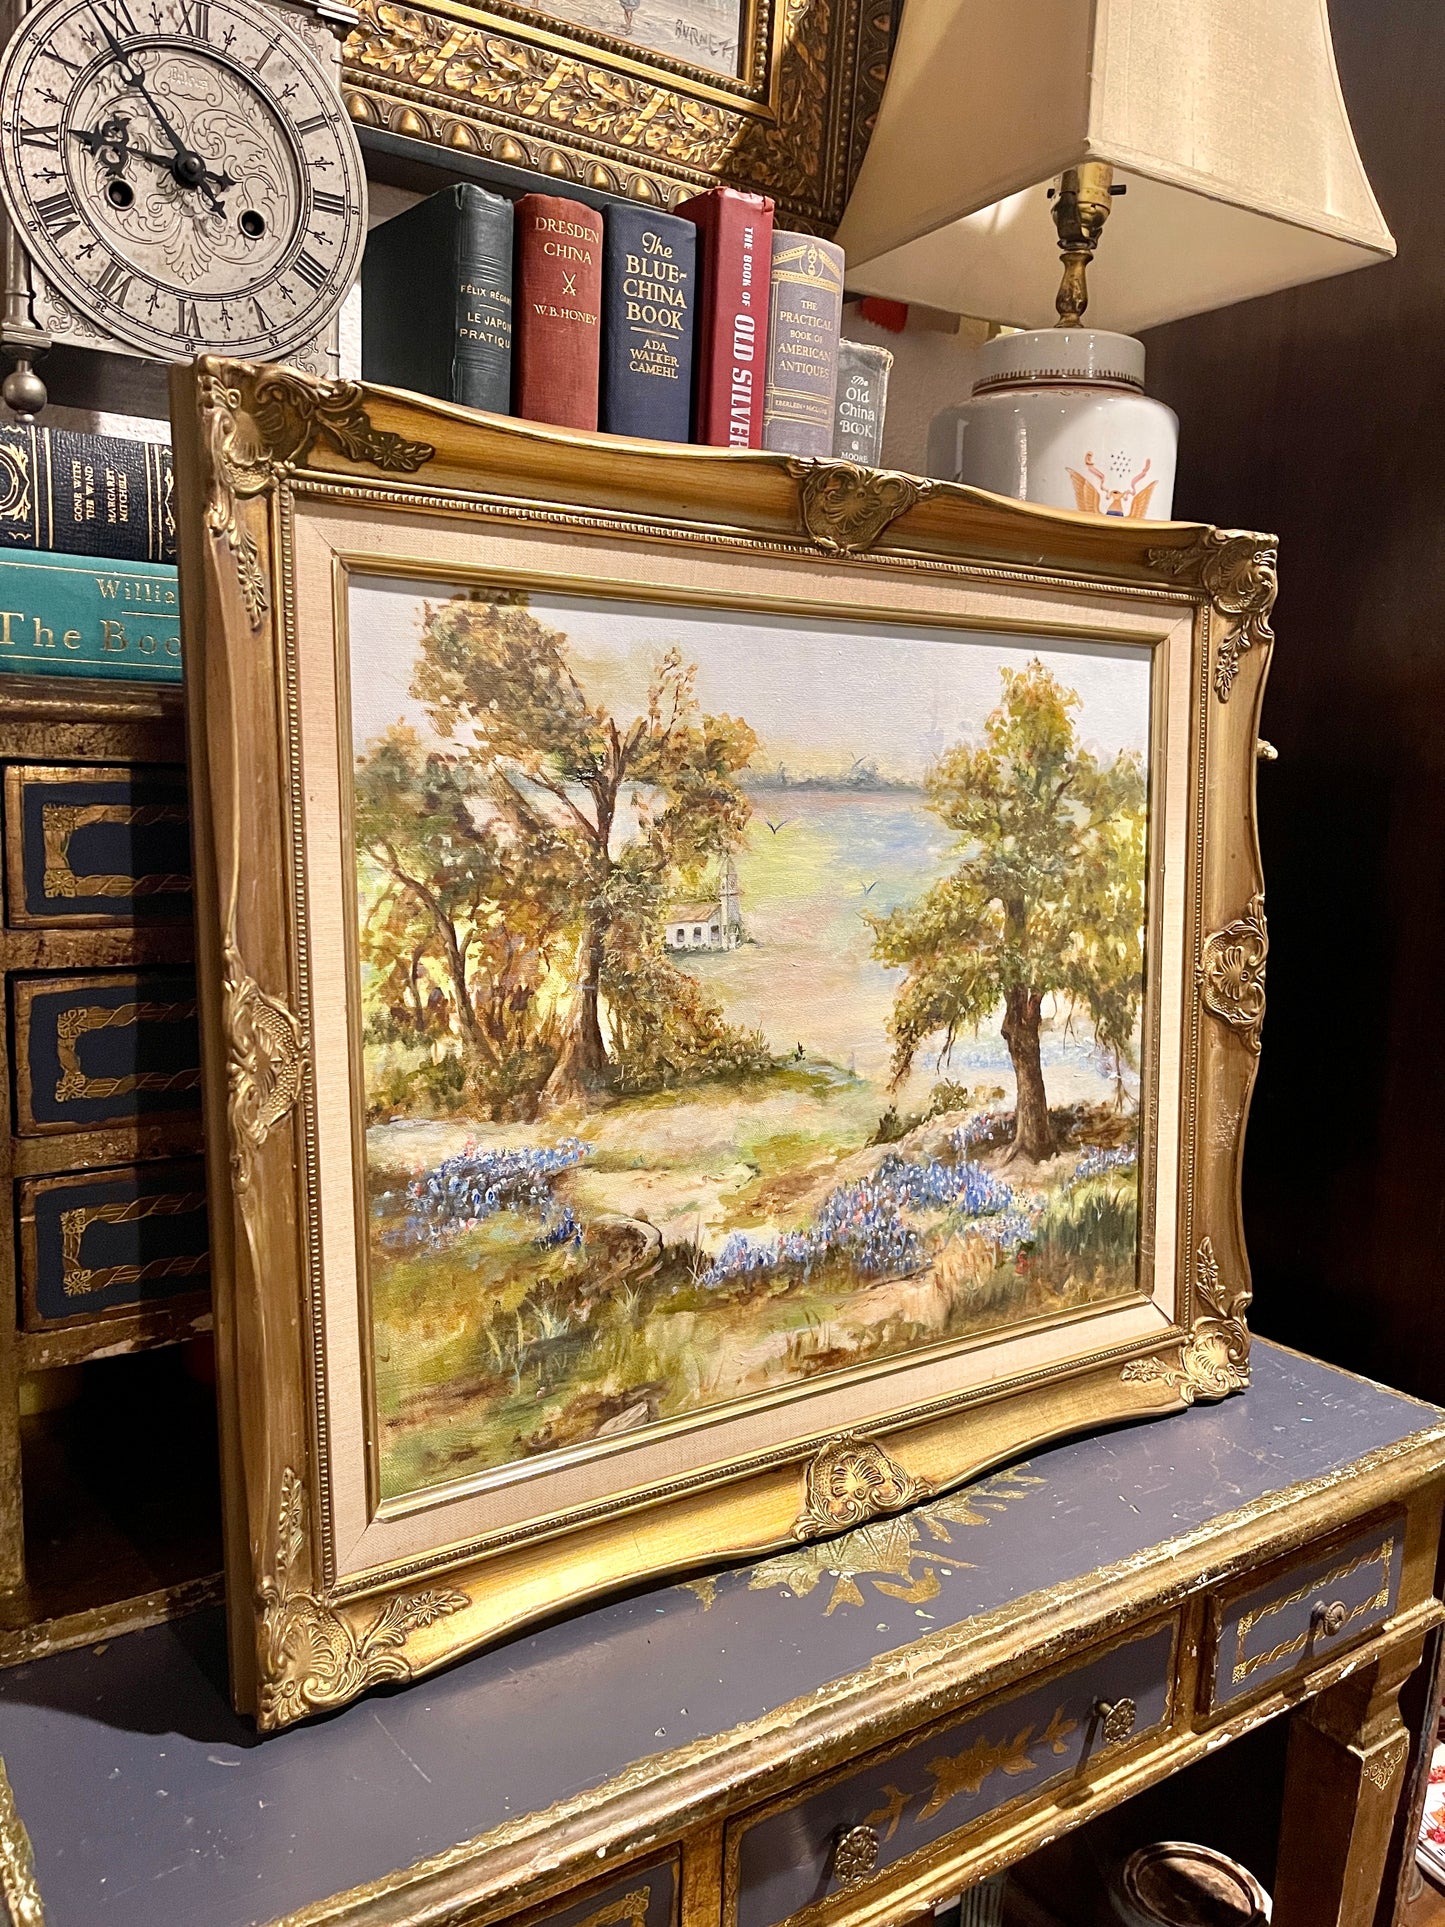 White Country Church in a field of Bluebonnets, Vintage Painting, Gold Frame